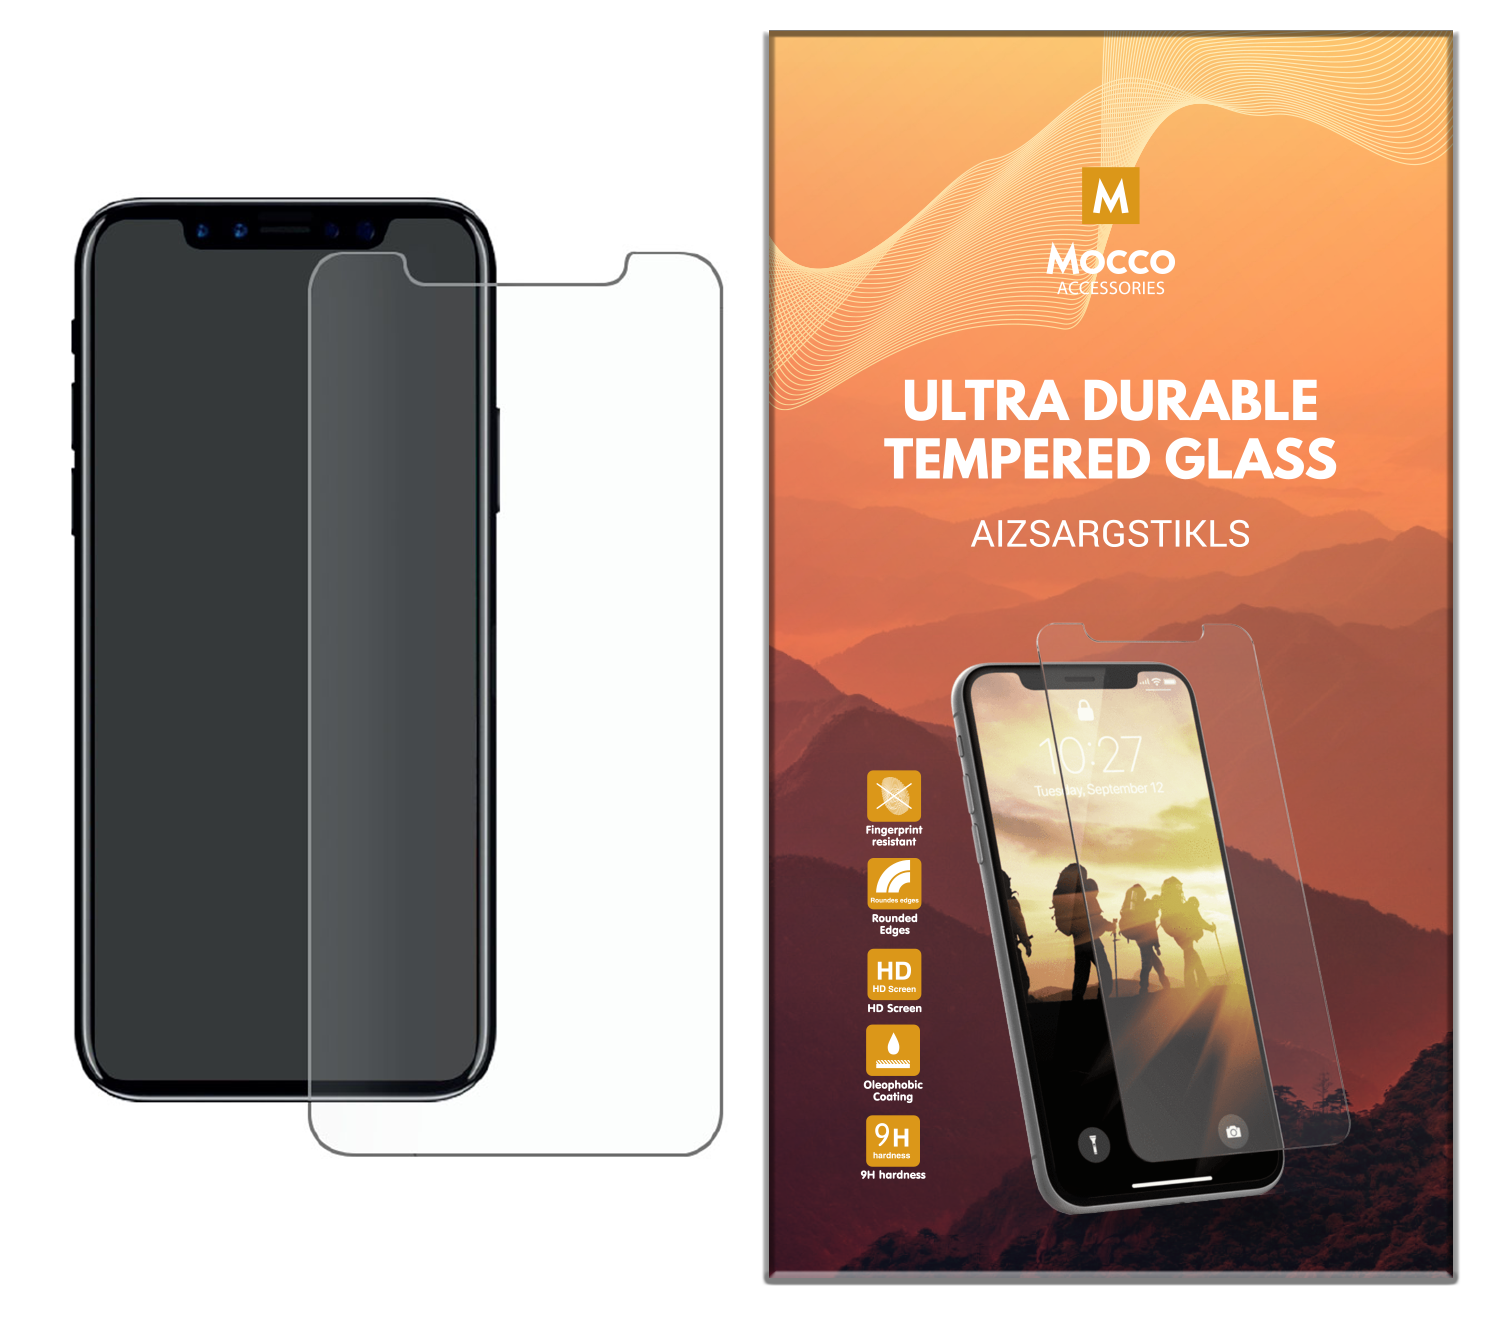 Mocco Ultra Durable Japanese Tempered Glass Premium 9H Screen Protector Apple iPhone 11 Pro Max / XS Max